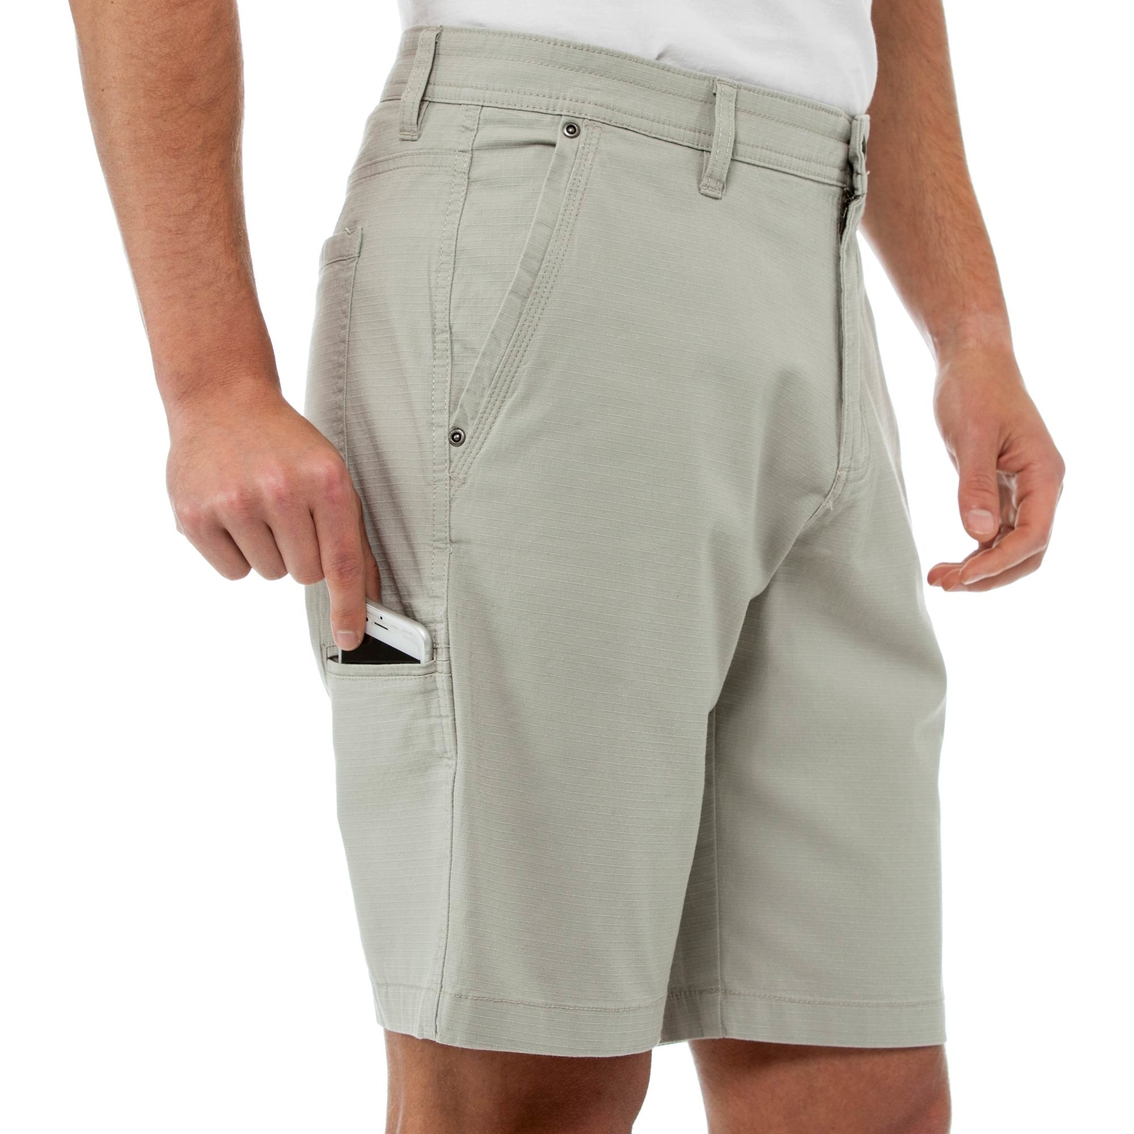 Weatherproof Utility Ripstop Shorts with Cell Phone Pocket - Image 3 of 3